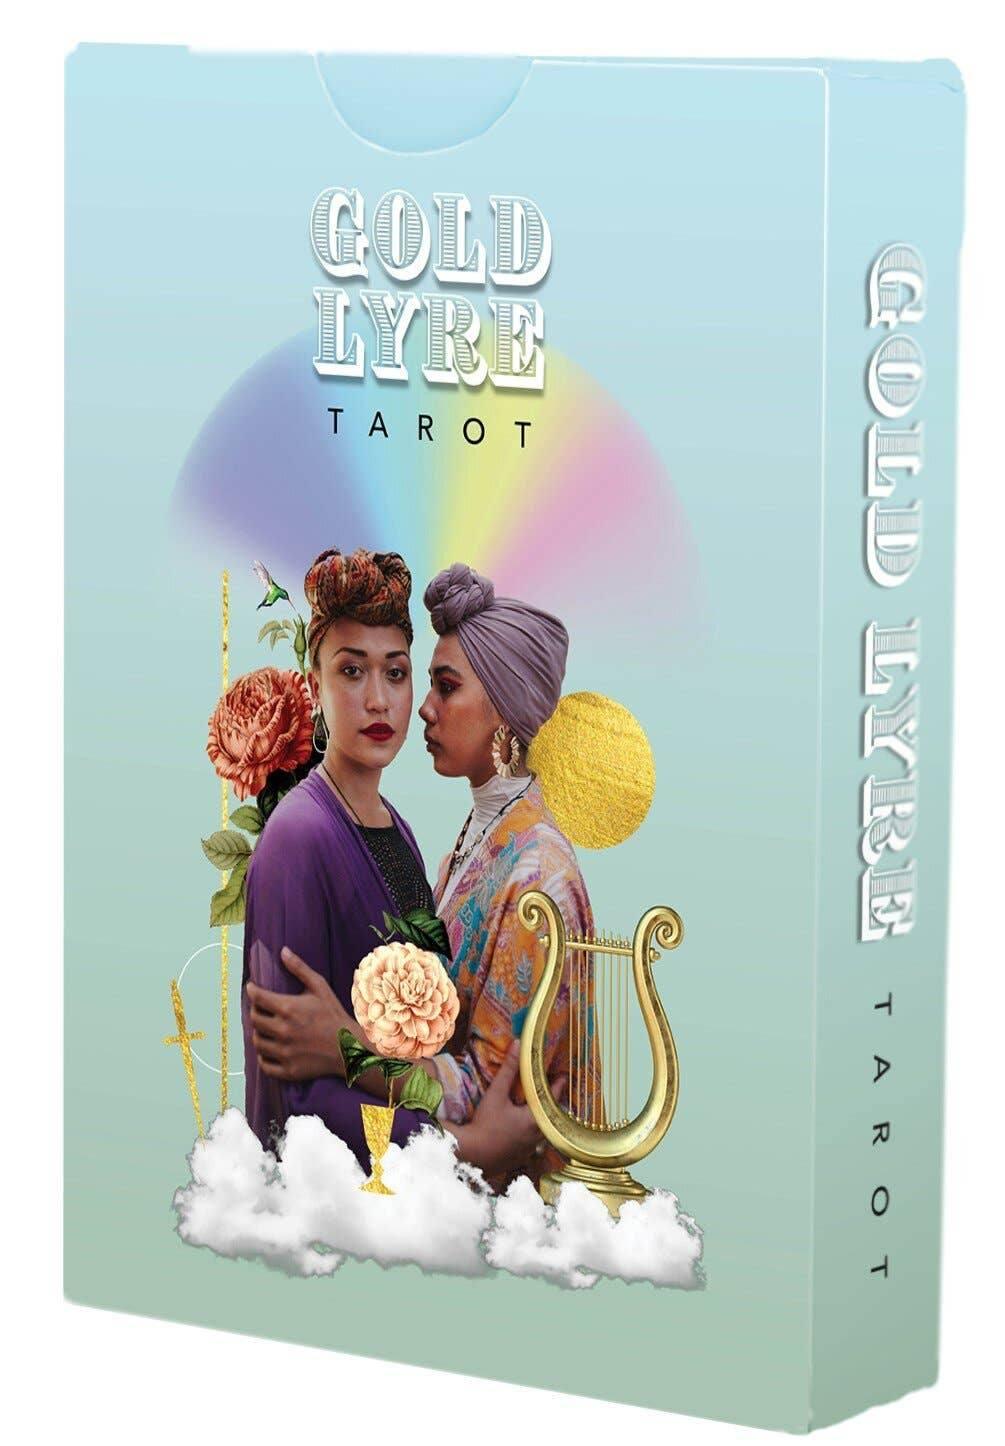 Gold Lyre Tarot - Esme and Elodie